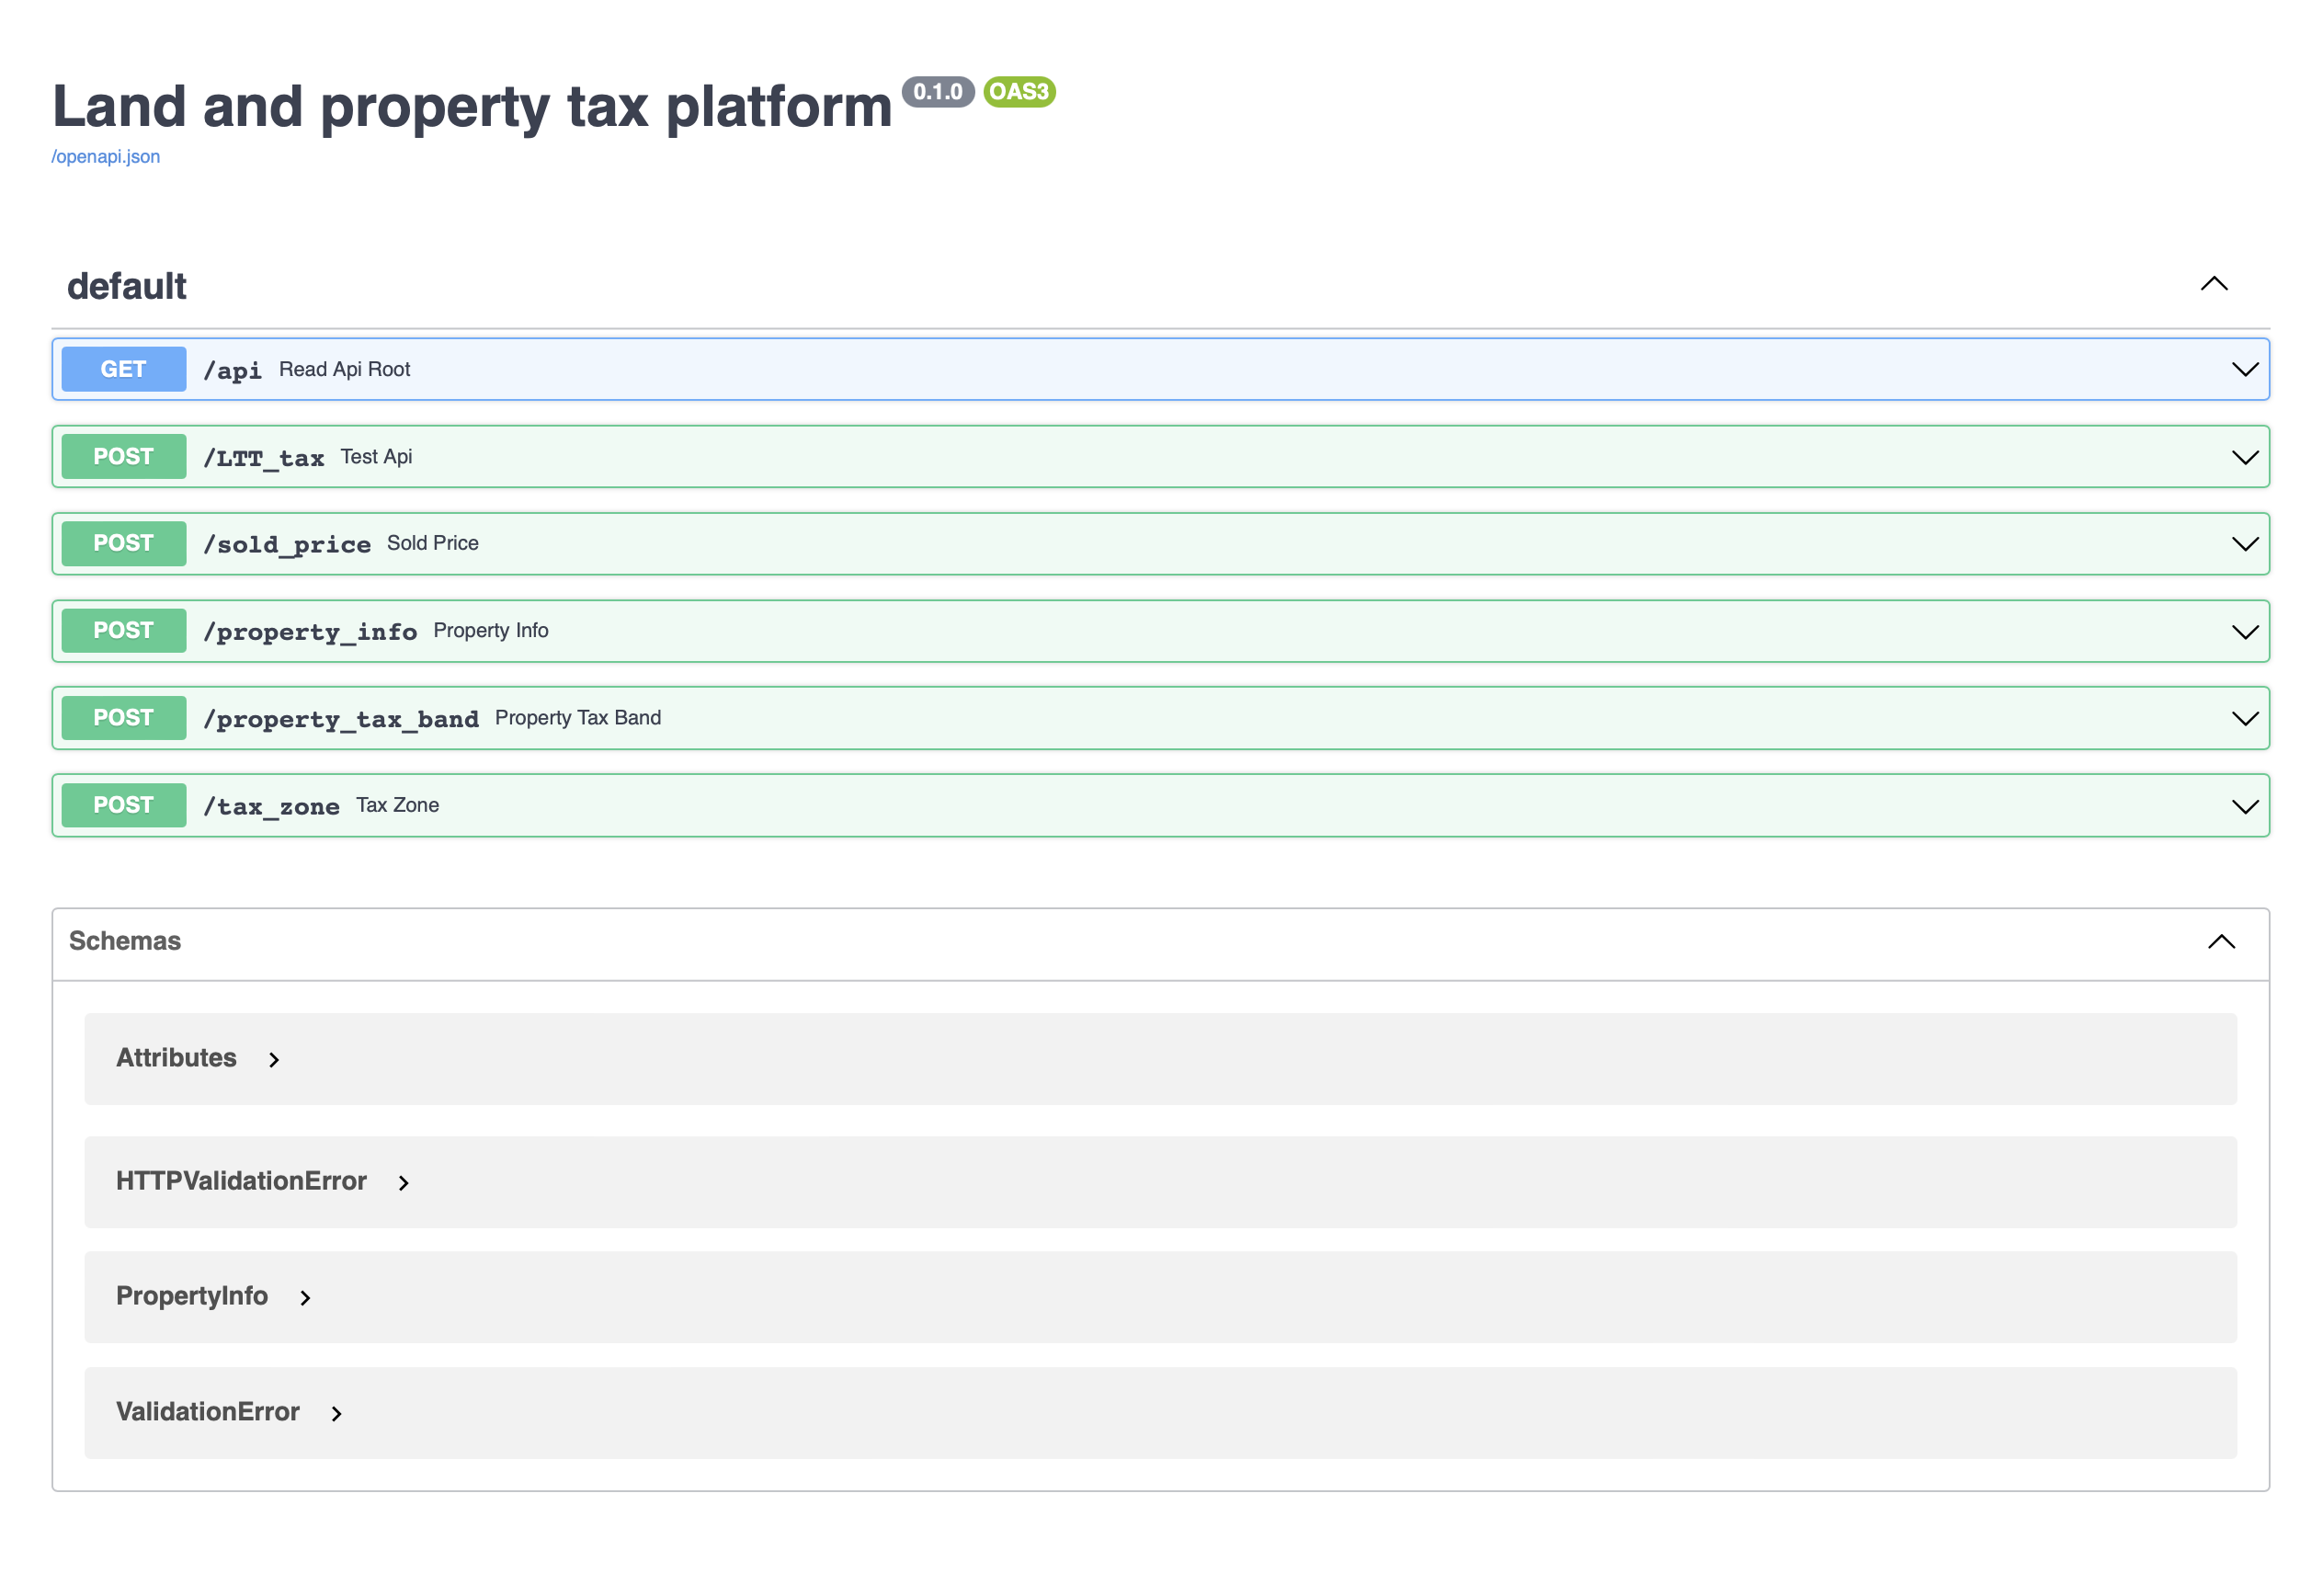 A screenshot of a Swagger API with end-points: api, LTT_tax, sold_price, property_info, property_tax_band, tax_zone